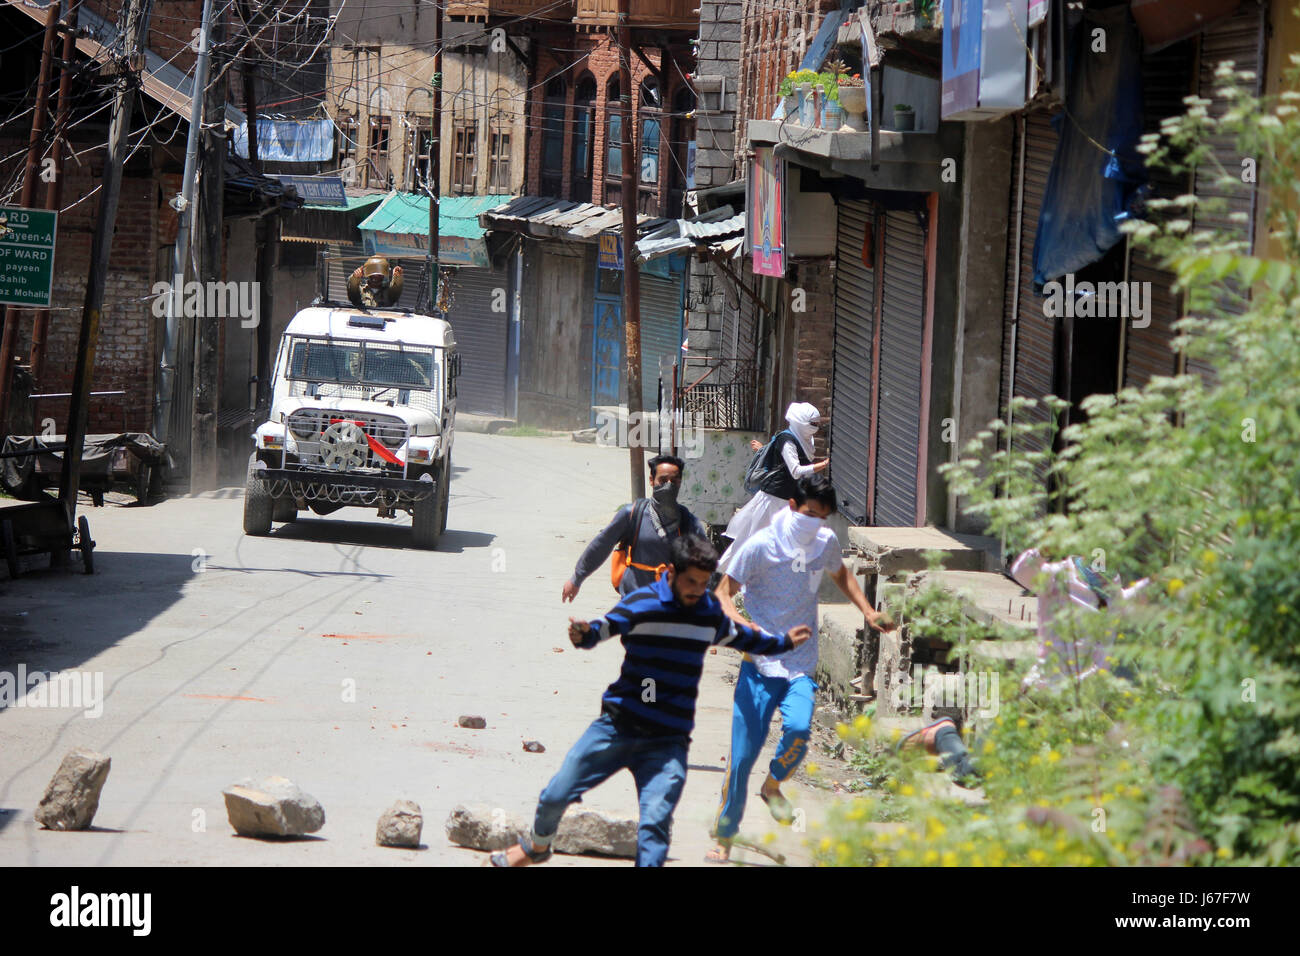 Anantnag, India. 19th May, 2017. Security forces chased Stone- pelters during clashes in Anantnag after Friday Prayers. Credit: Muneeb Ul Islam/Pacific Press/Alamy Live News Stock Photo